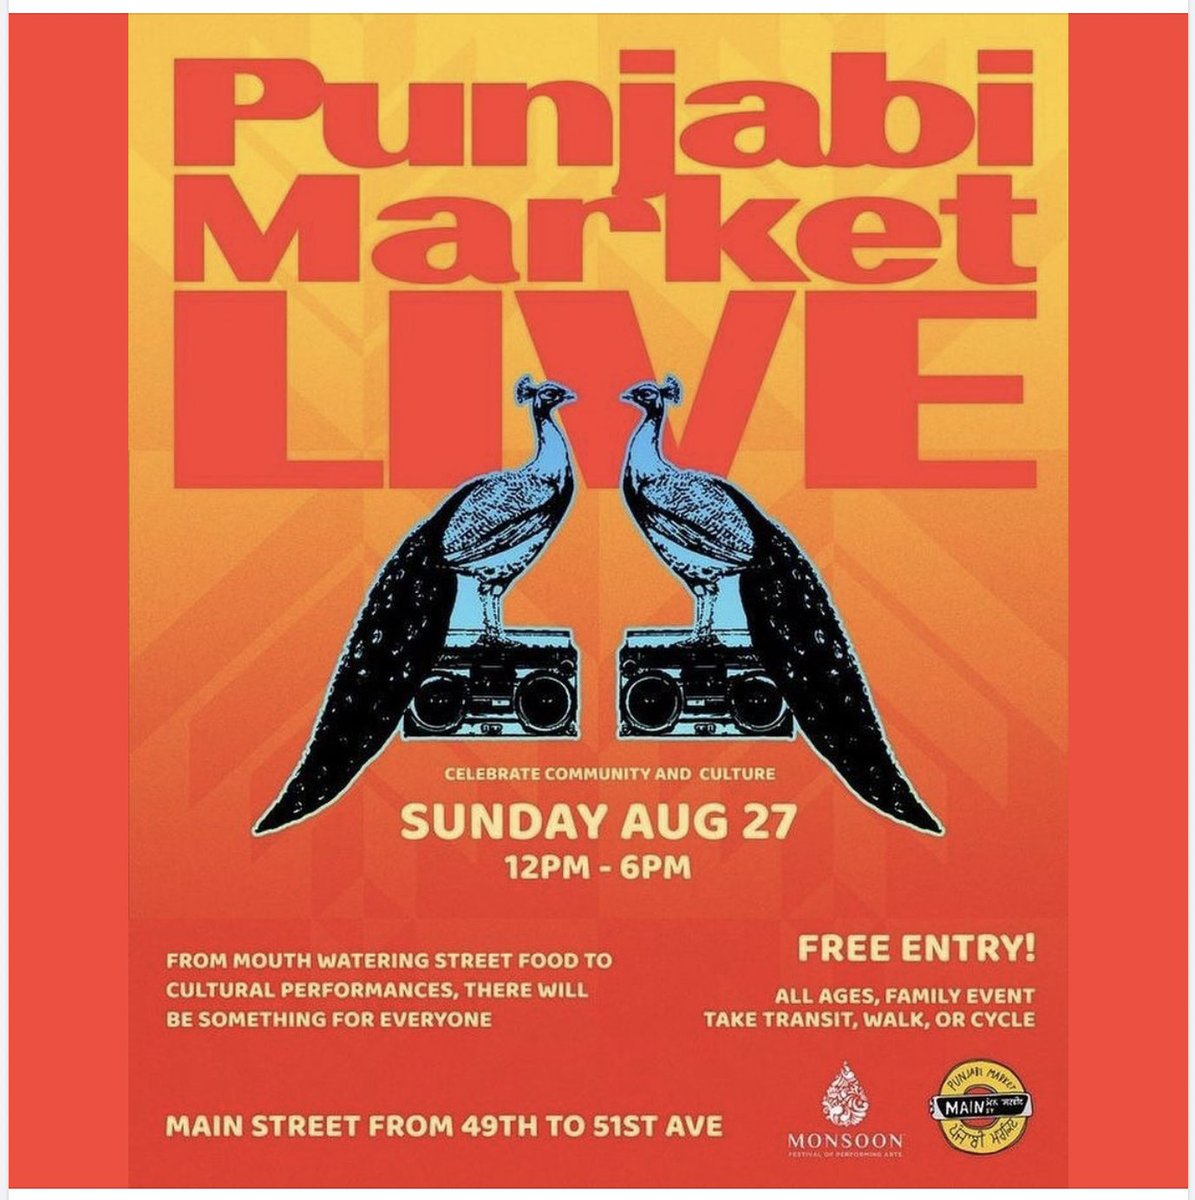 Celebrate #community and culture at Punjabi Market Live, Sunday, Aug. 27, 12 noon to 6pm, Main St., 49th to 51st. Street food, cultural performances.

#punjabimarket #streetparty #culturalevent #liveentertainment #streetfood #southvancouver